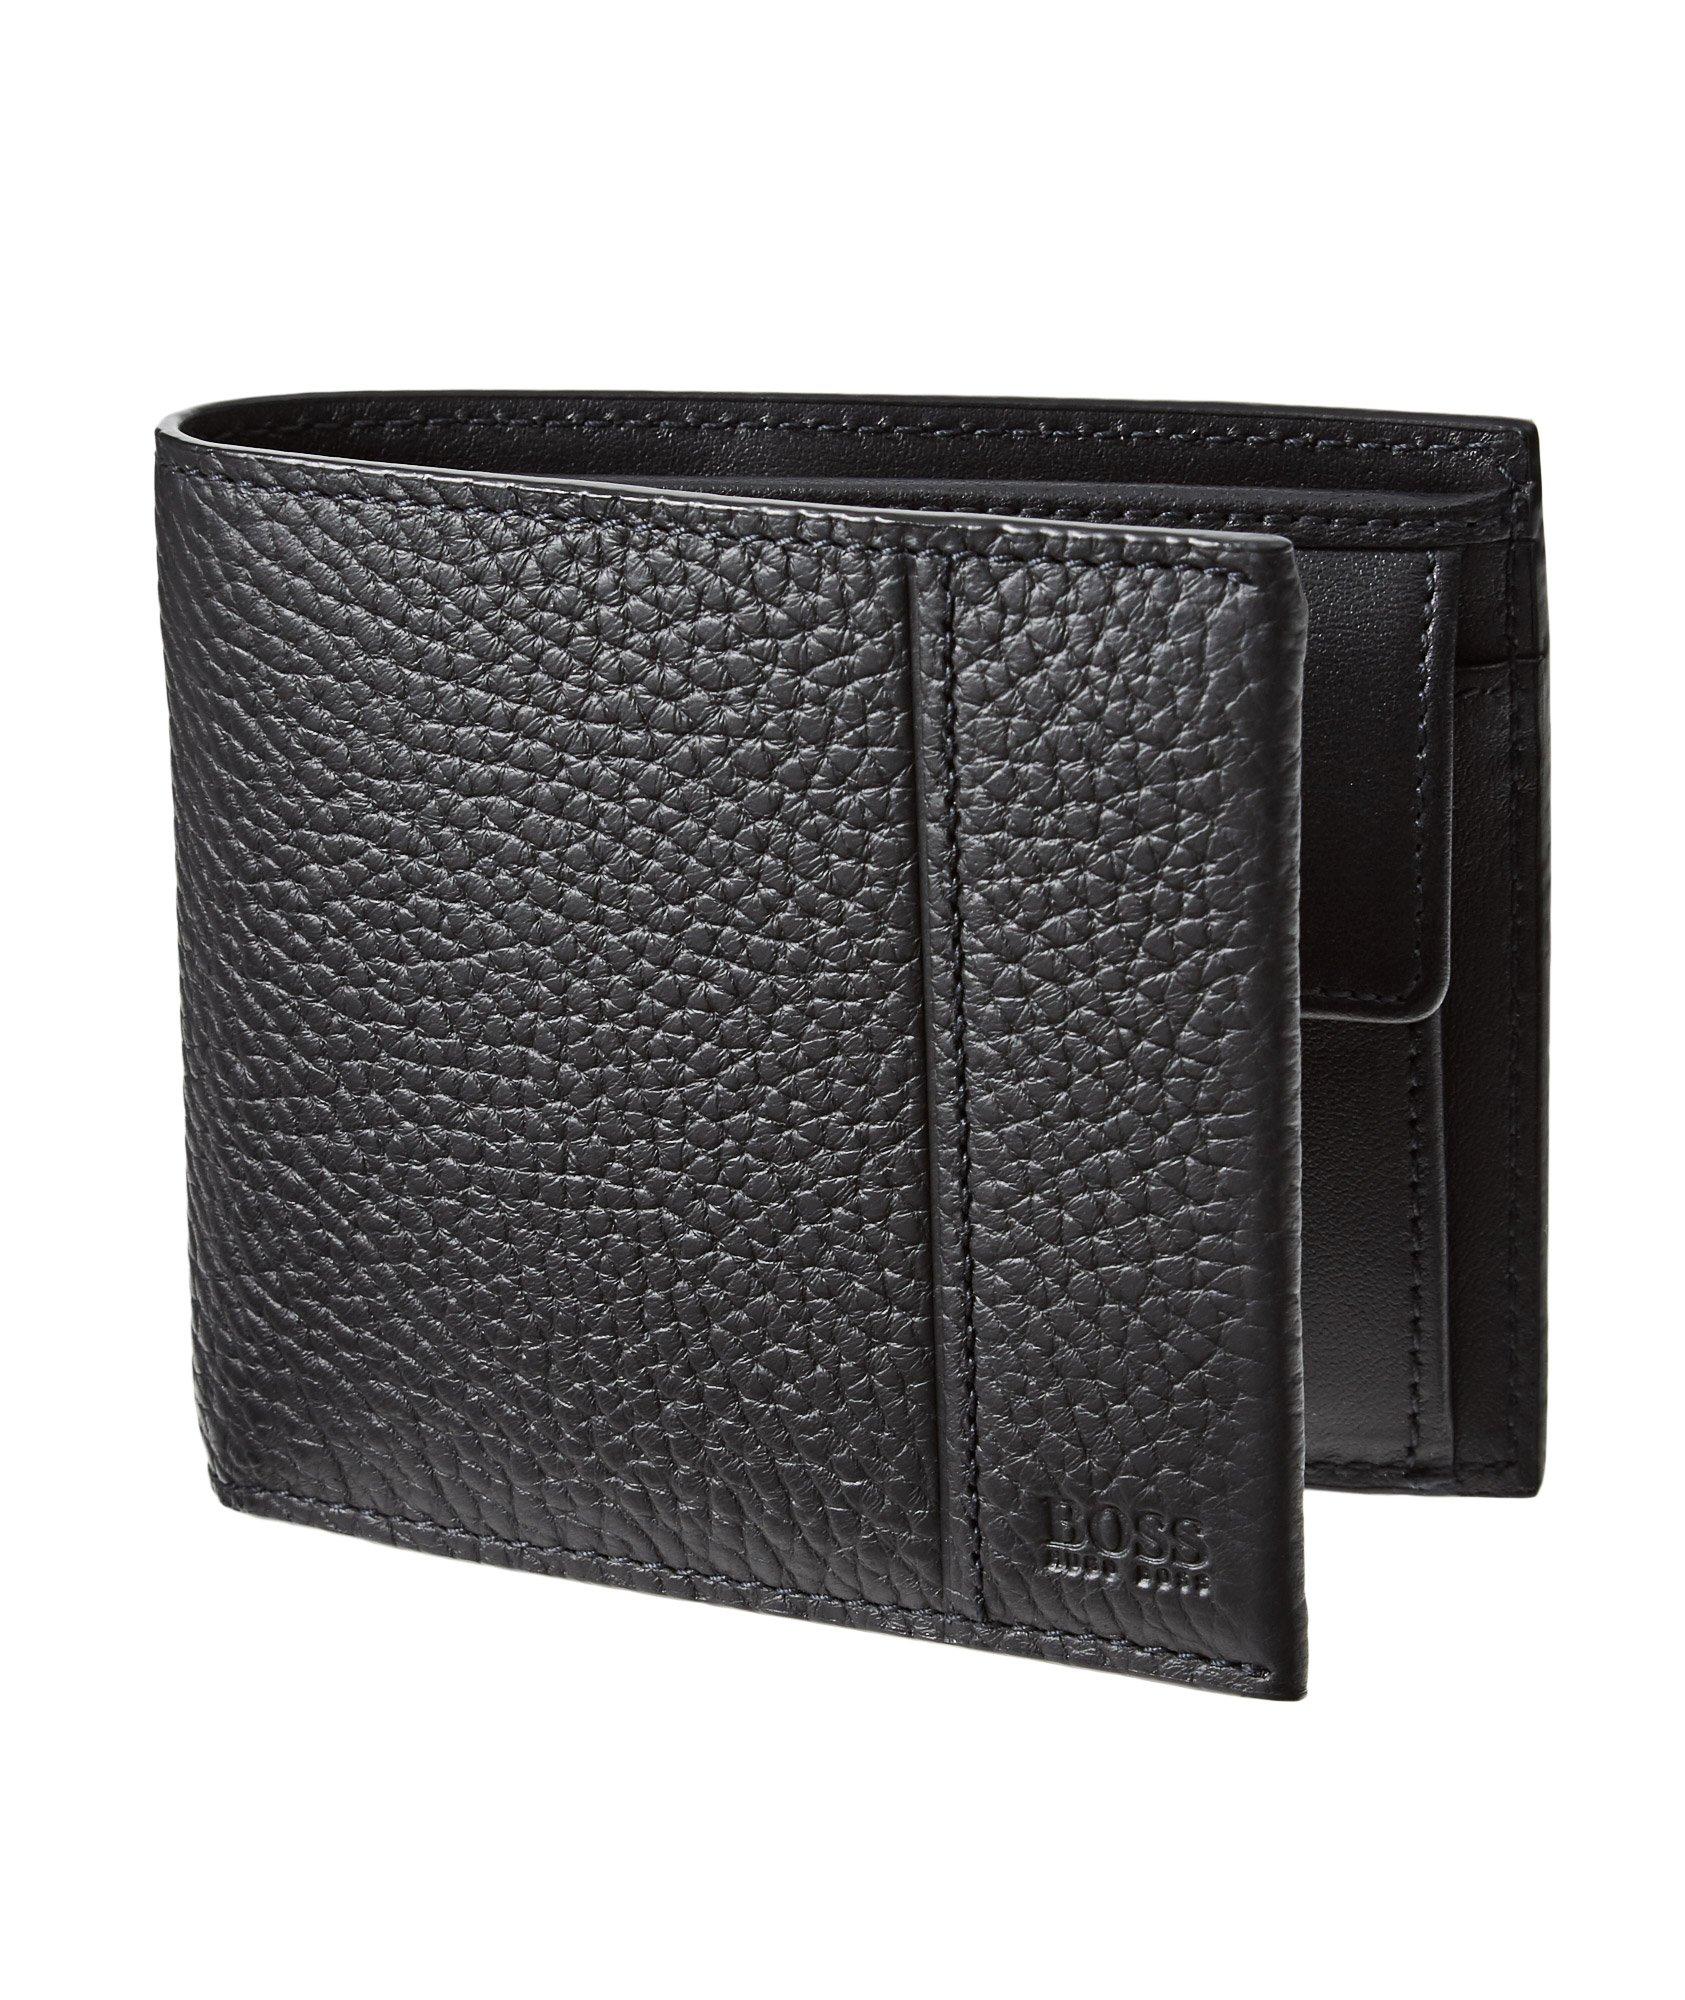 Pebbled Leather Trifold Wallet image 0